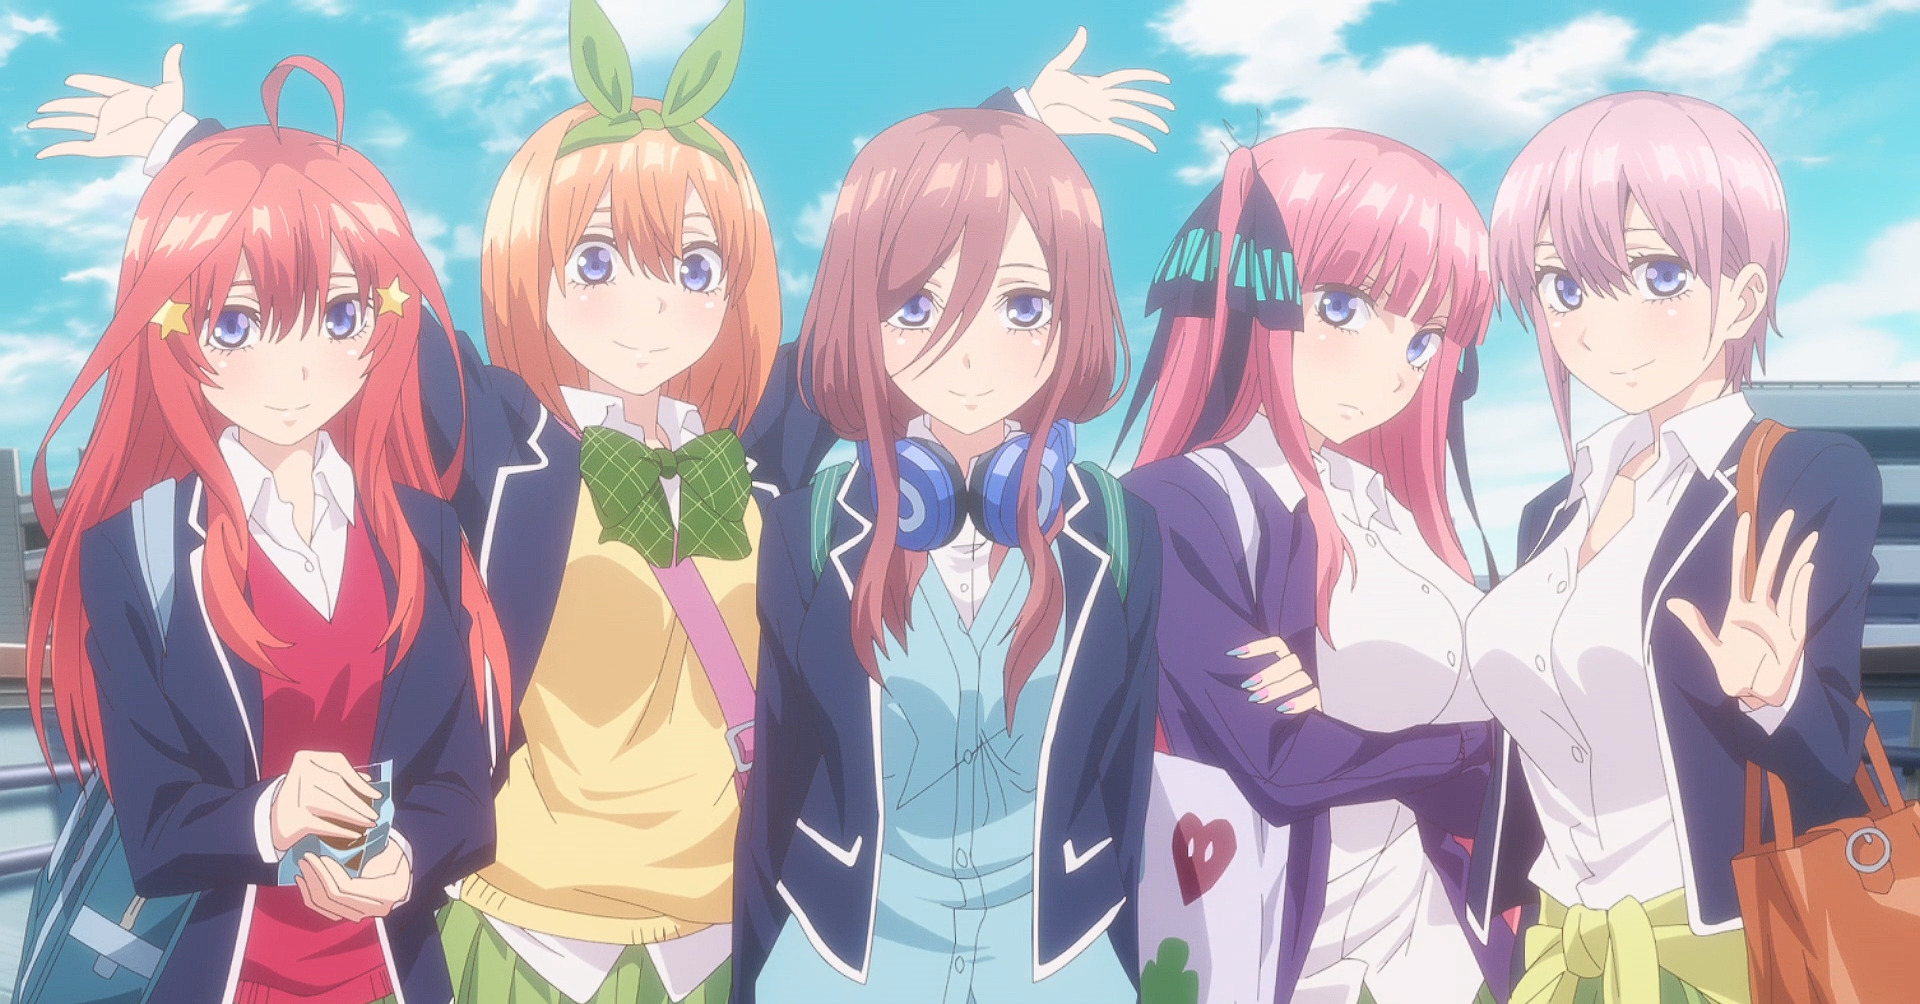 The Quintessential Quintuplets Anime Gets Second Season - Anime